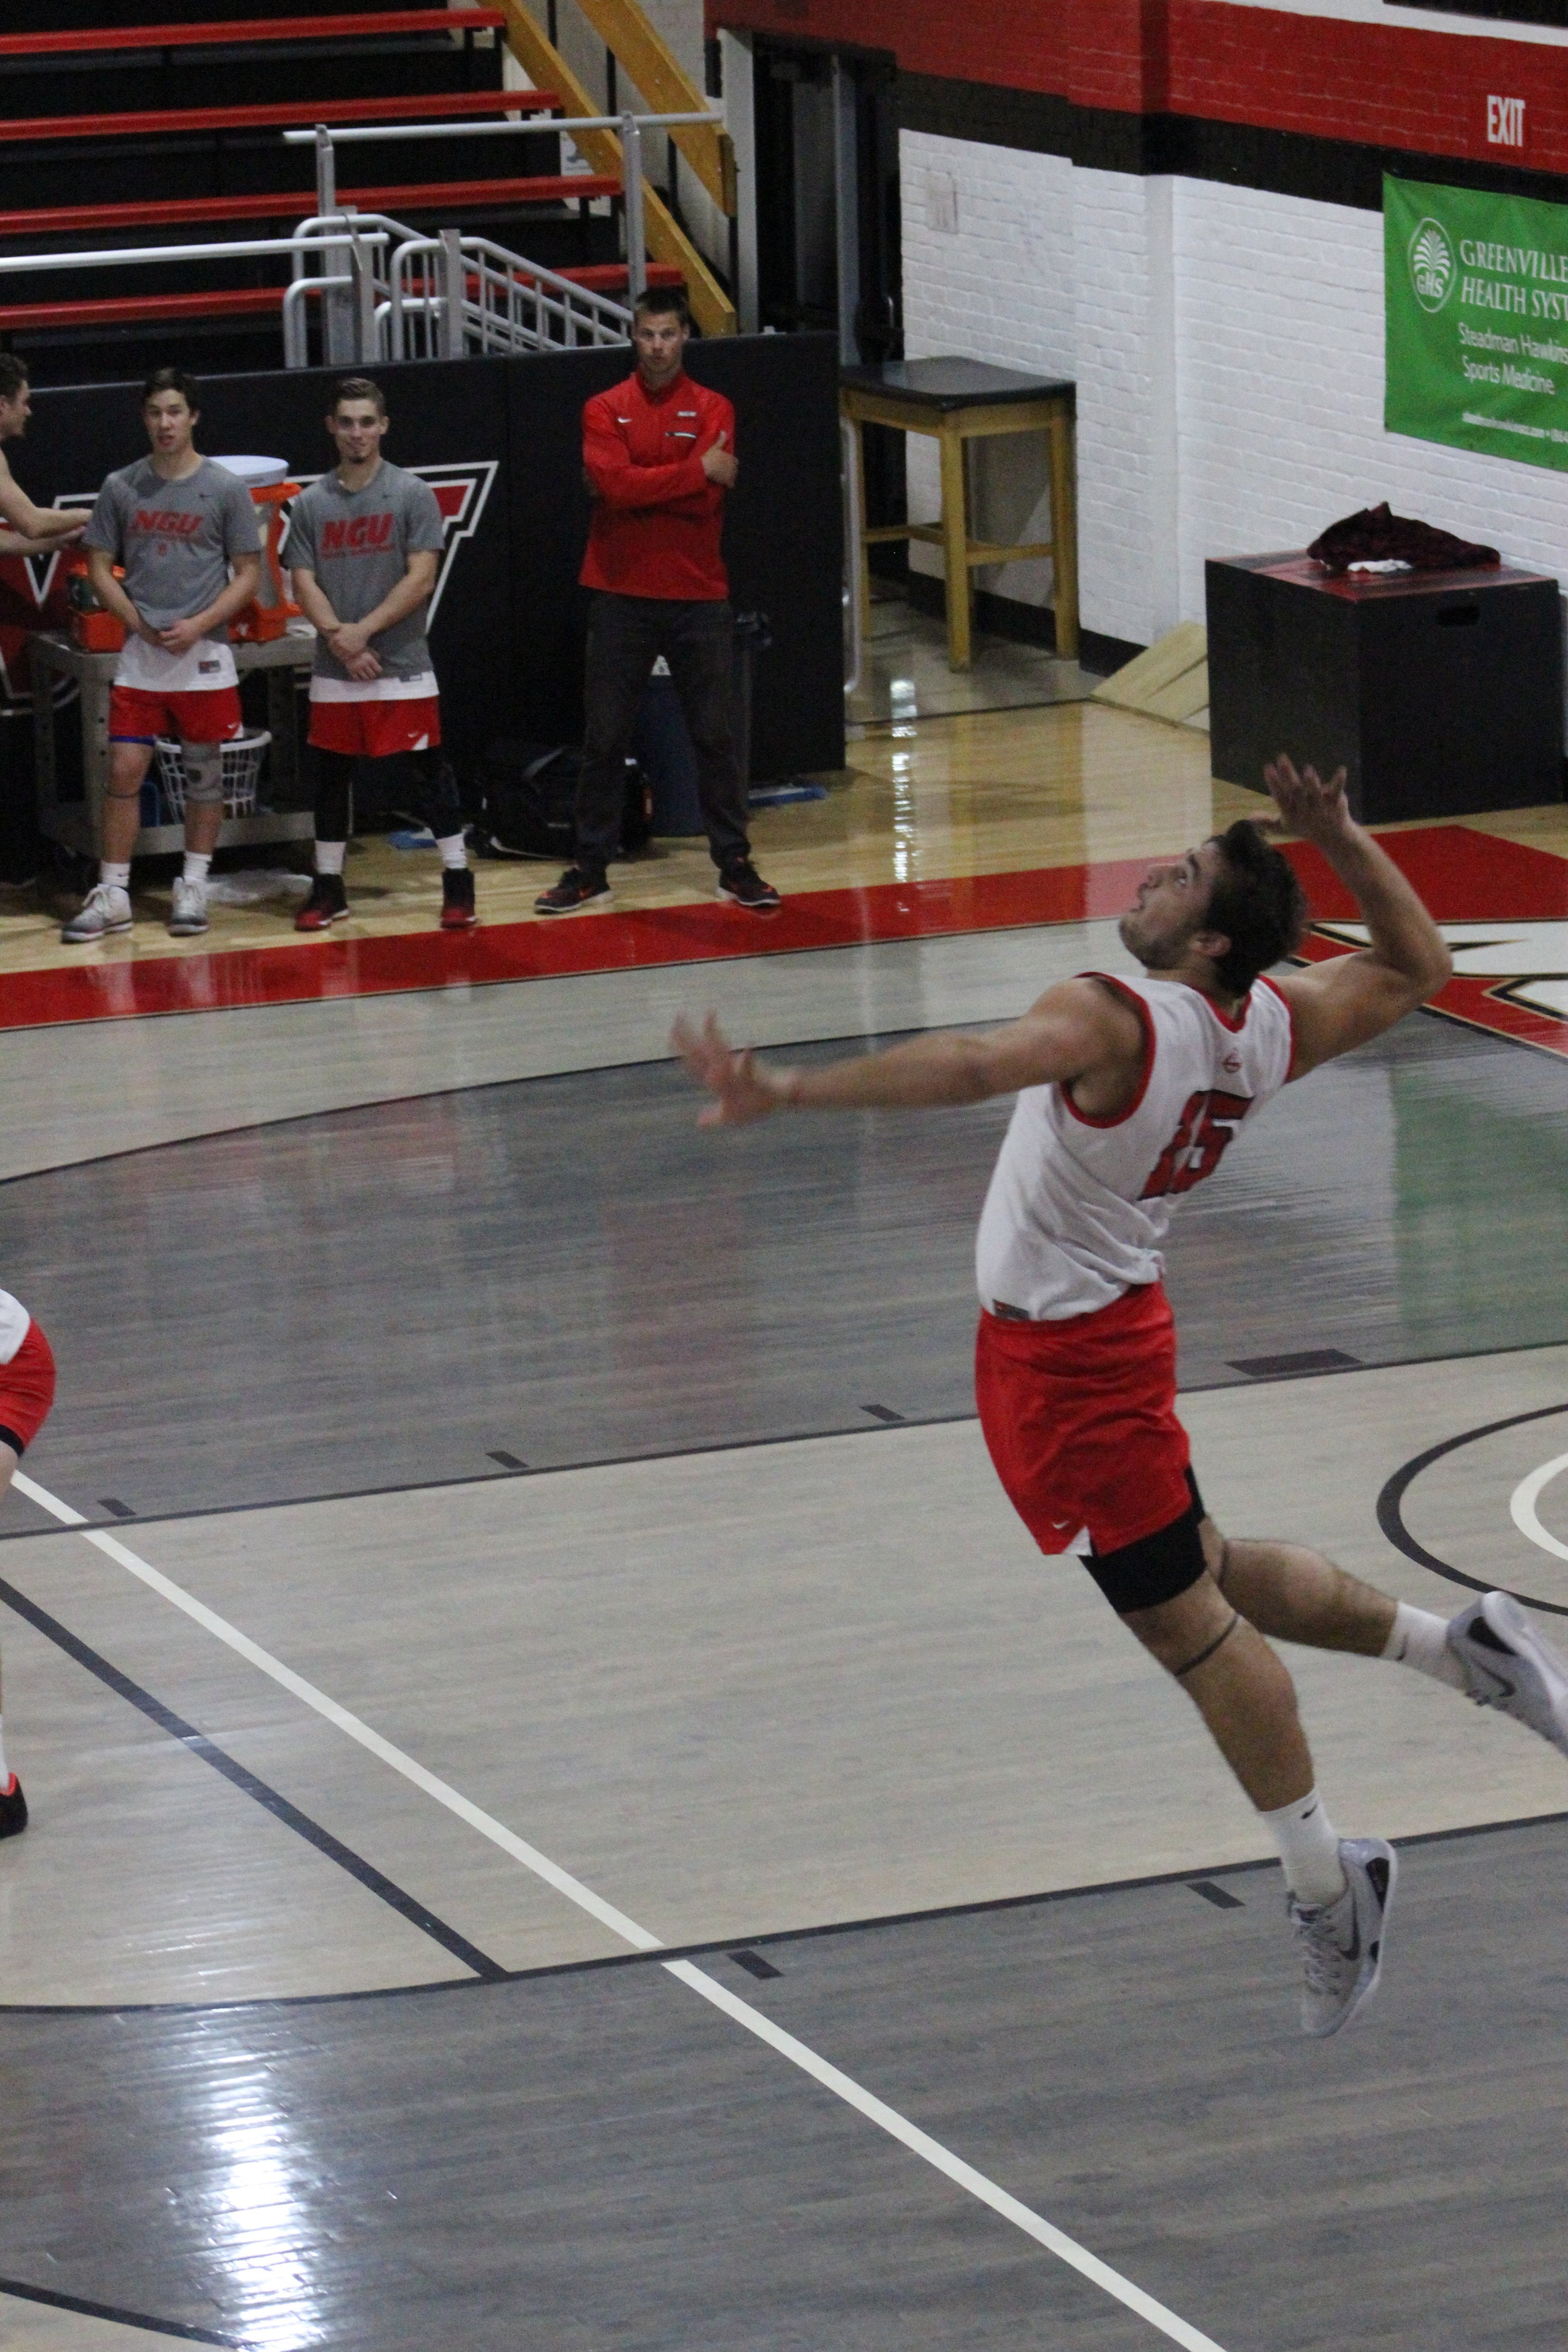 Number 15 Mathew McManaway starting the game with a powerful jump serve.&nbsp;